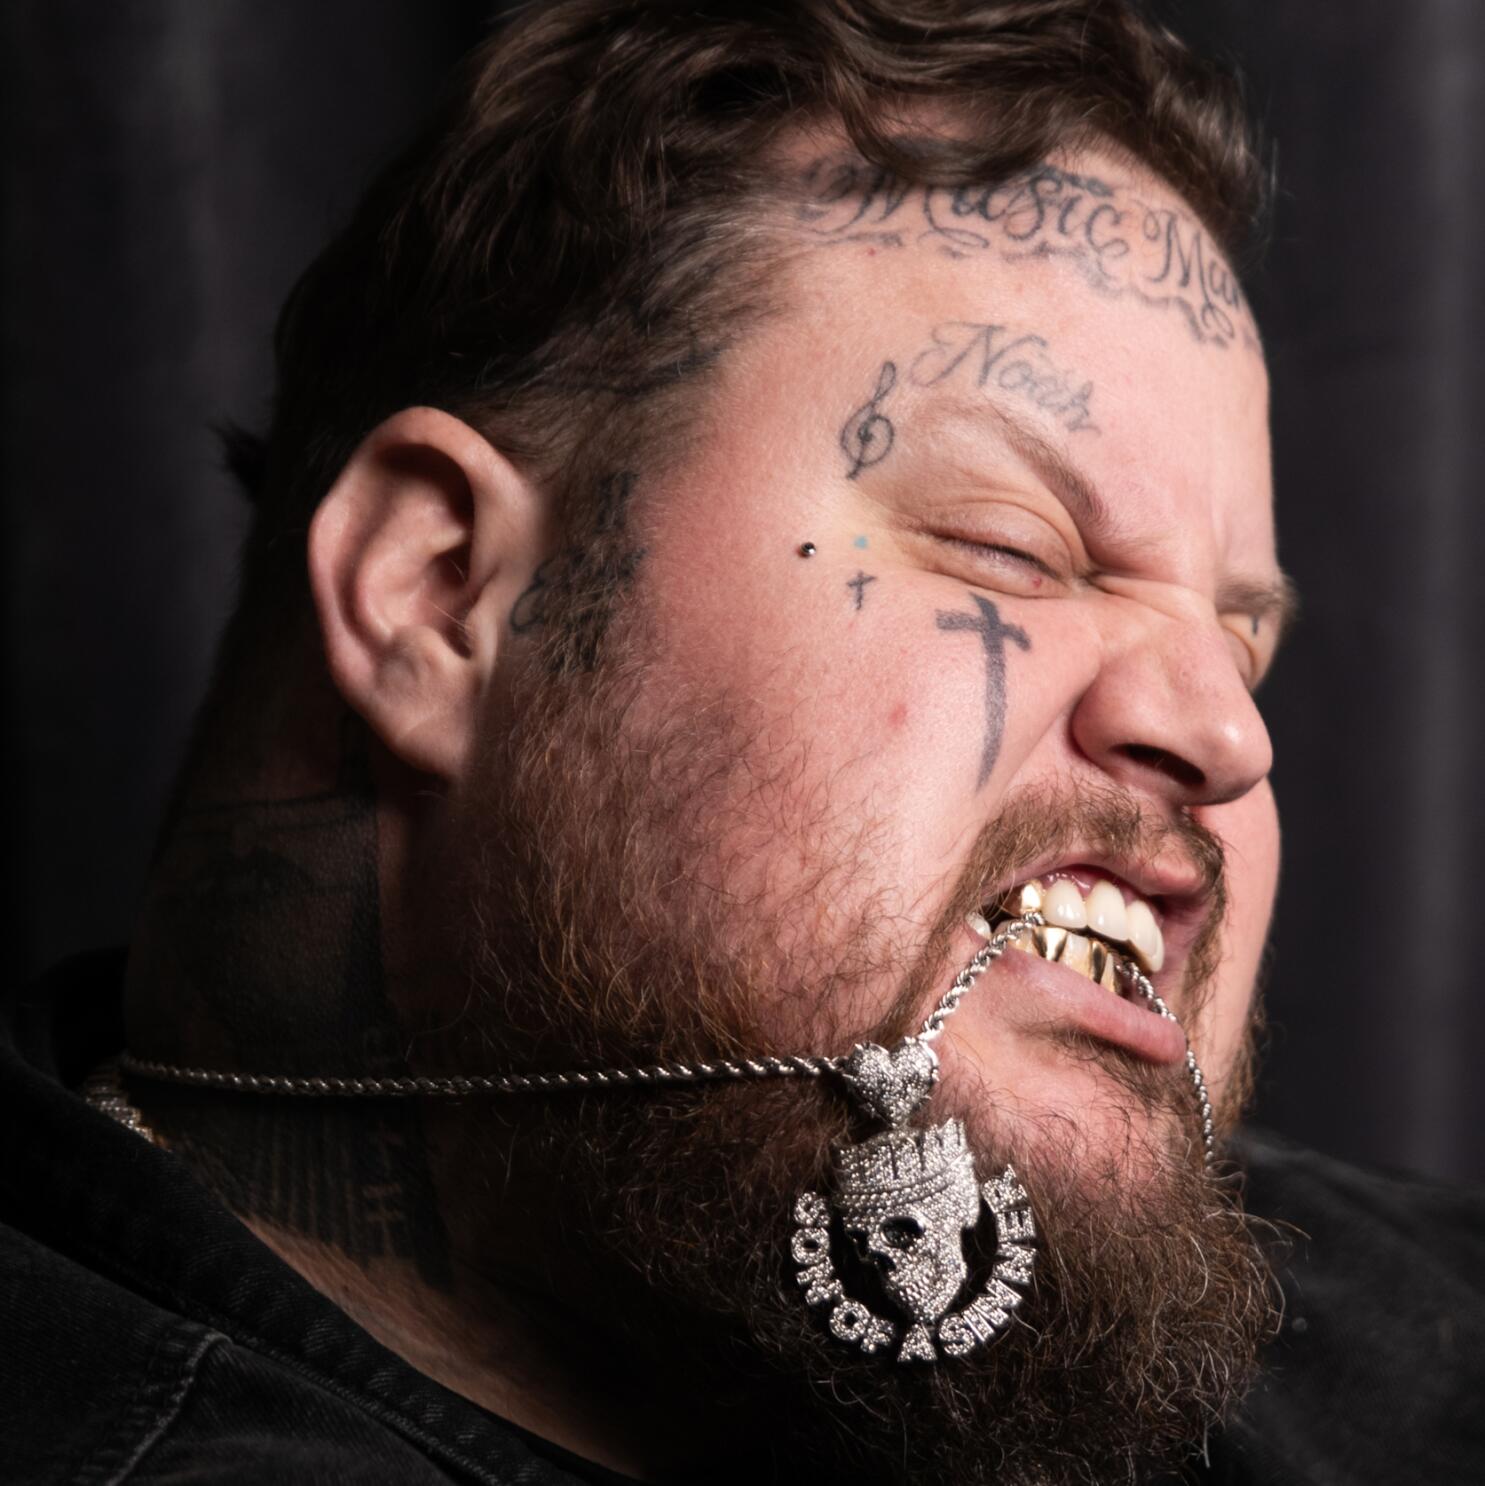 How Jelly Roll became the new (tattooed) face of country - Los